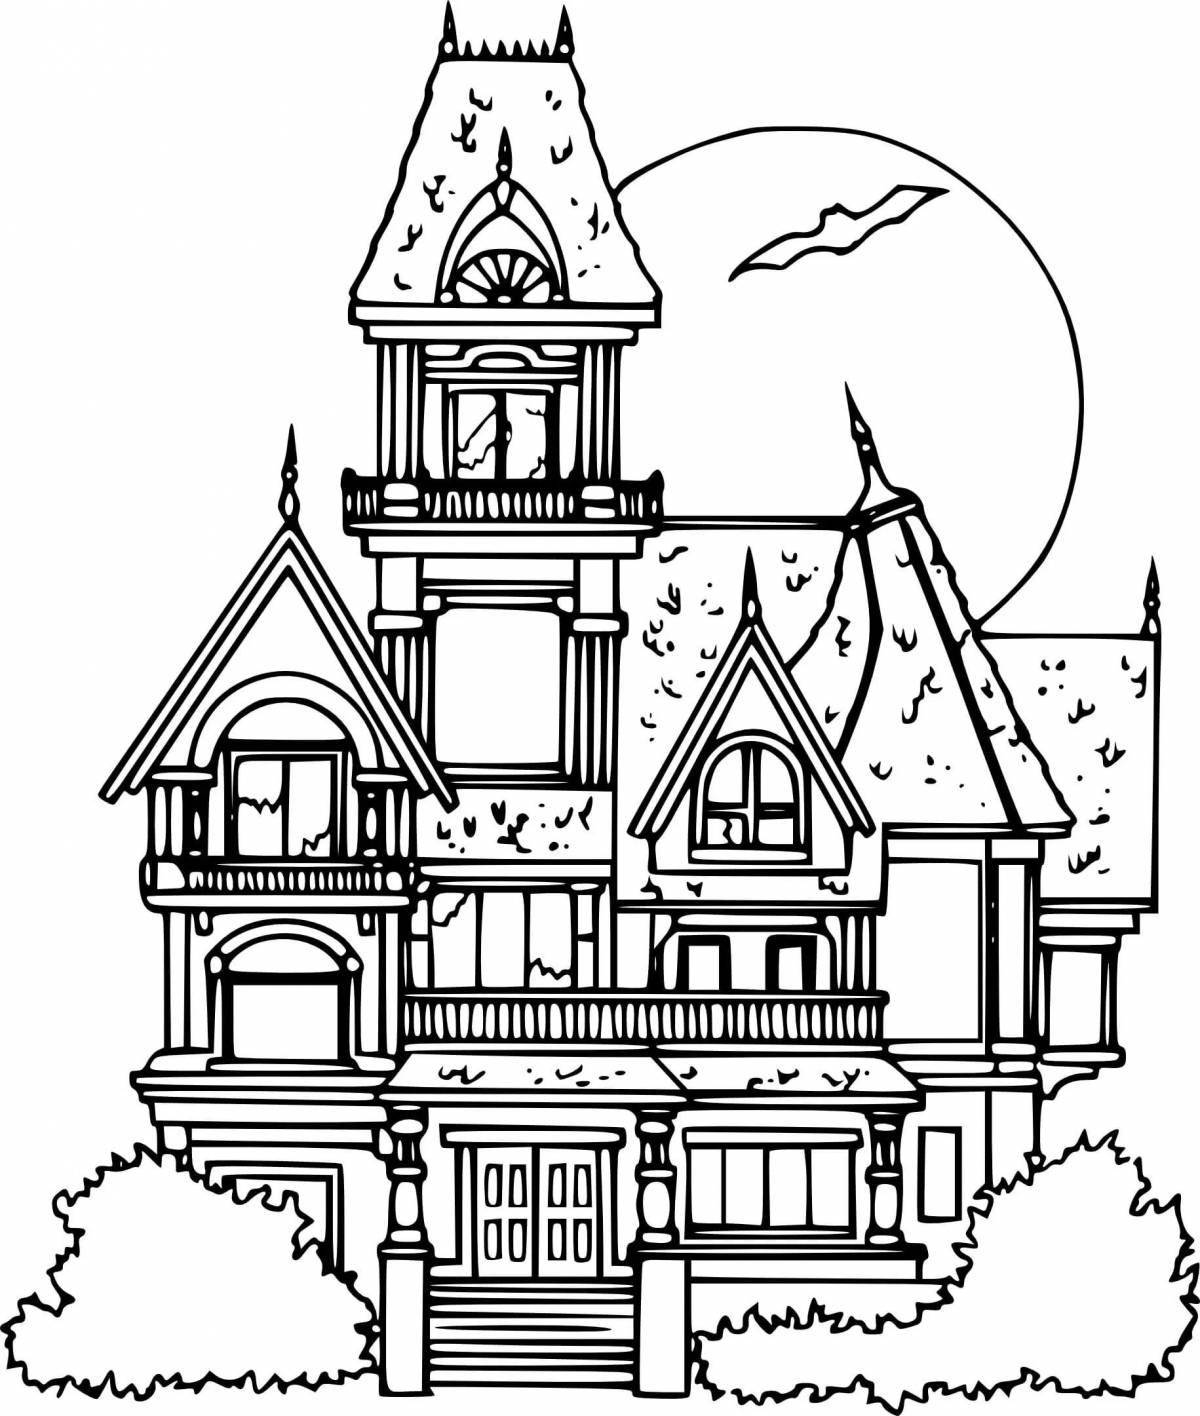 Amazing beautiful house coloring book